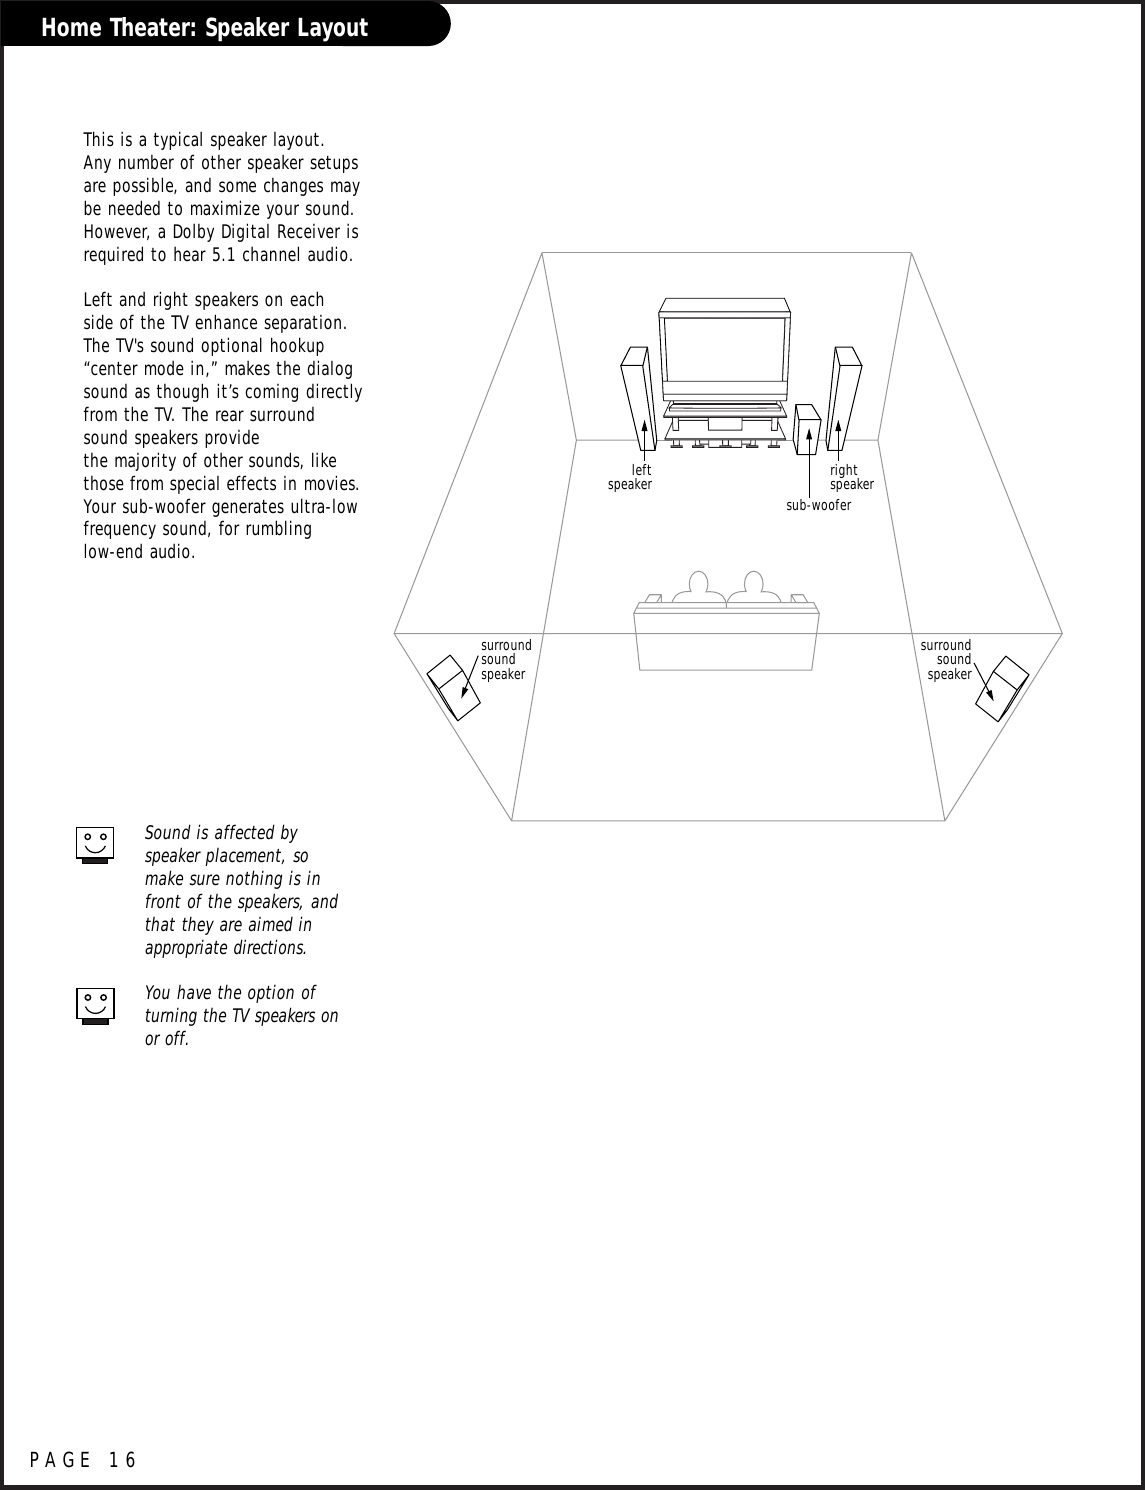 PAGE 16Home Theater: Speaker Layoutsub-wooferrightspeakerleftspeakersurroundsound speakersurroundsound speakerThis is a typical speaker layout. Any number of other speaker setupsare possible, and some changes maybe needed to maximize your sound.However, a Dolby Digital Receiver isrequired to hear 5.1 channel audio.Left and right speakers on each side of the TV enhance separation.The TV&apos;s sound optional hookup“center mode in,” makes the dialogsound as though it’s coming directlyfrom the TV. The rear surroundsound speakers provide the majority of other sounds, likethose from special effects in movies.Your sub-woofer generates ultra-low frequency sound, for rumbling low-end audio.Sound is affected by speaker placement, so make sure nothing is infront of the speakers, andthat they are aimed inappropriate directions.You have the option of turning the TV speakers onor off.